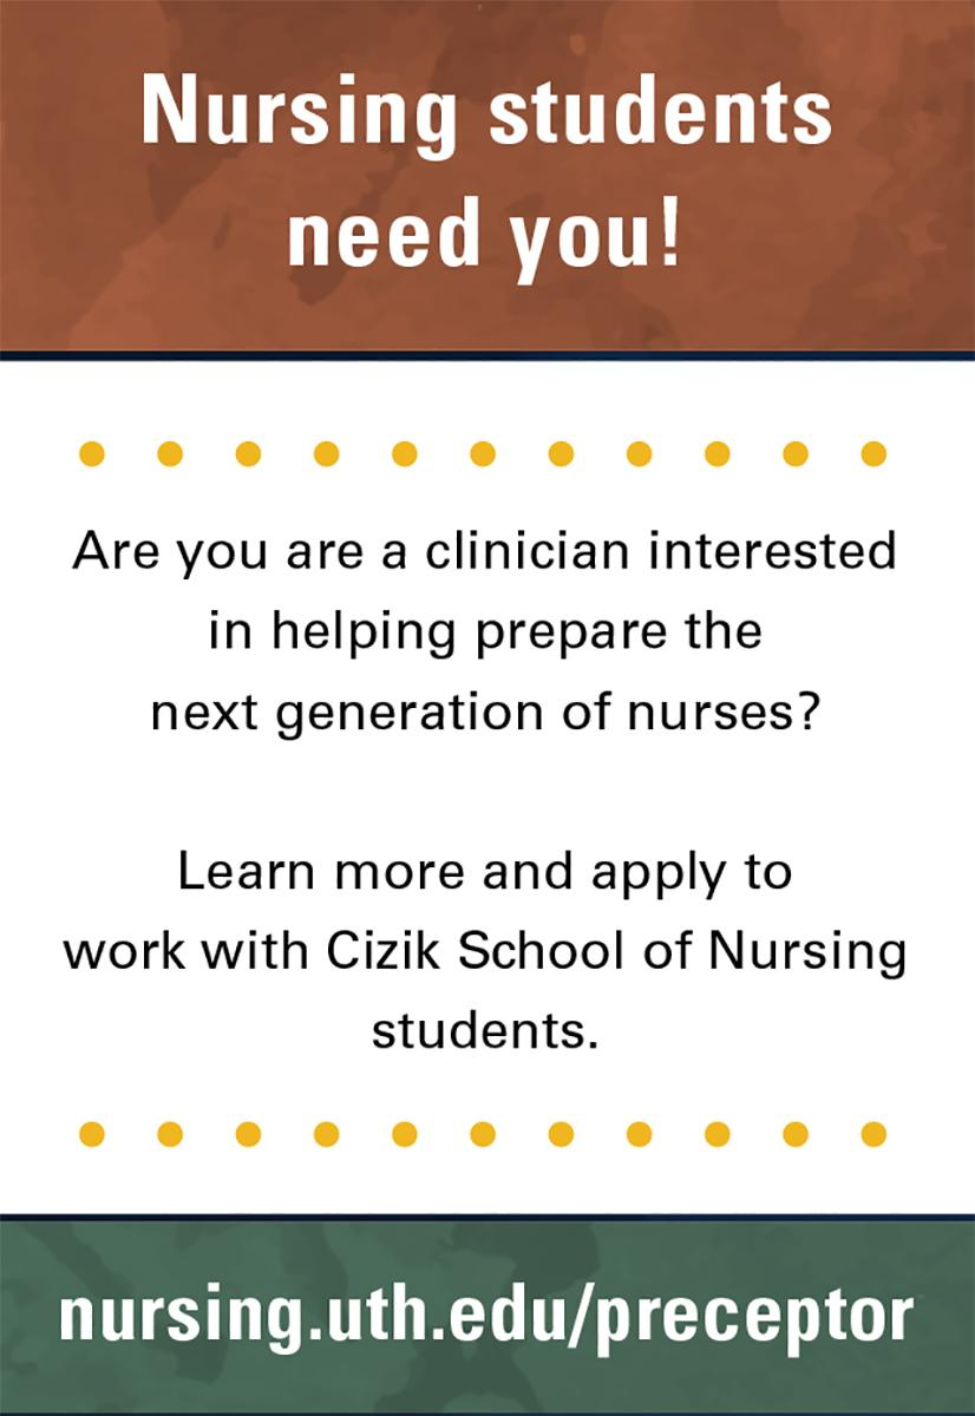 Learn more about becoming a preceptor at nursing.uth.edu/preceptor